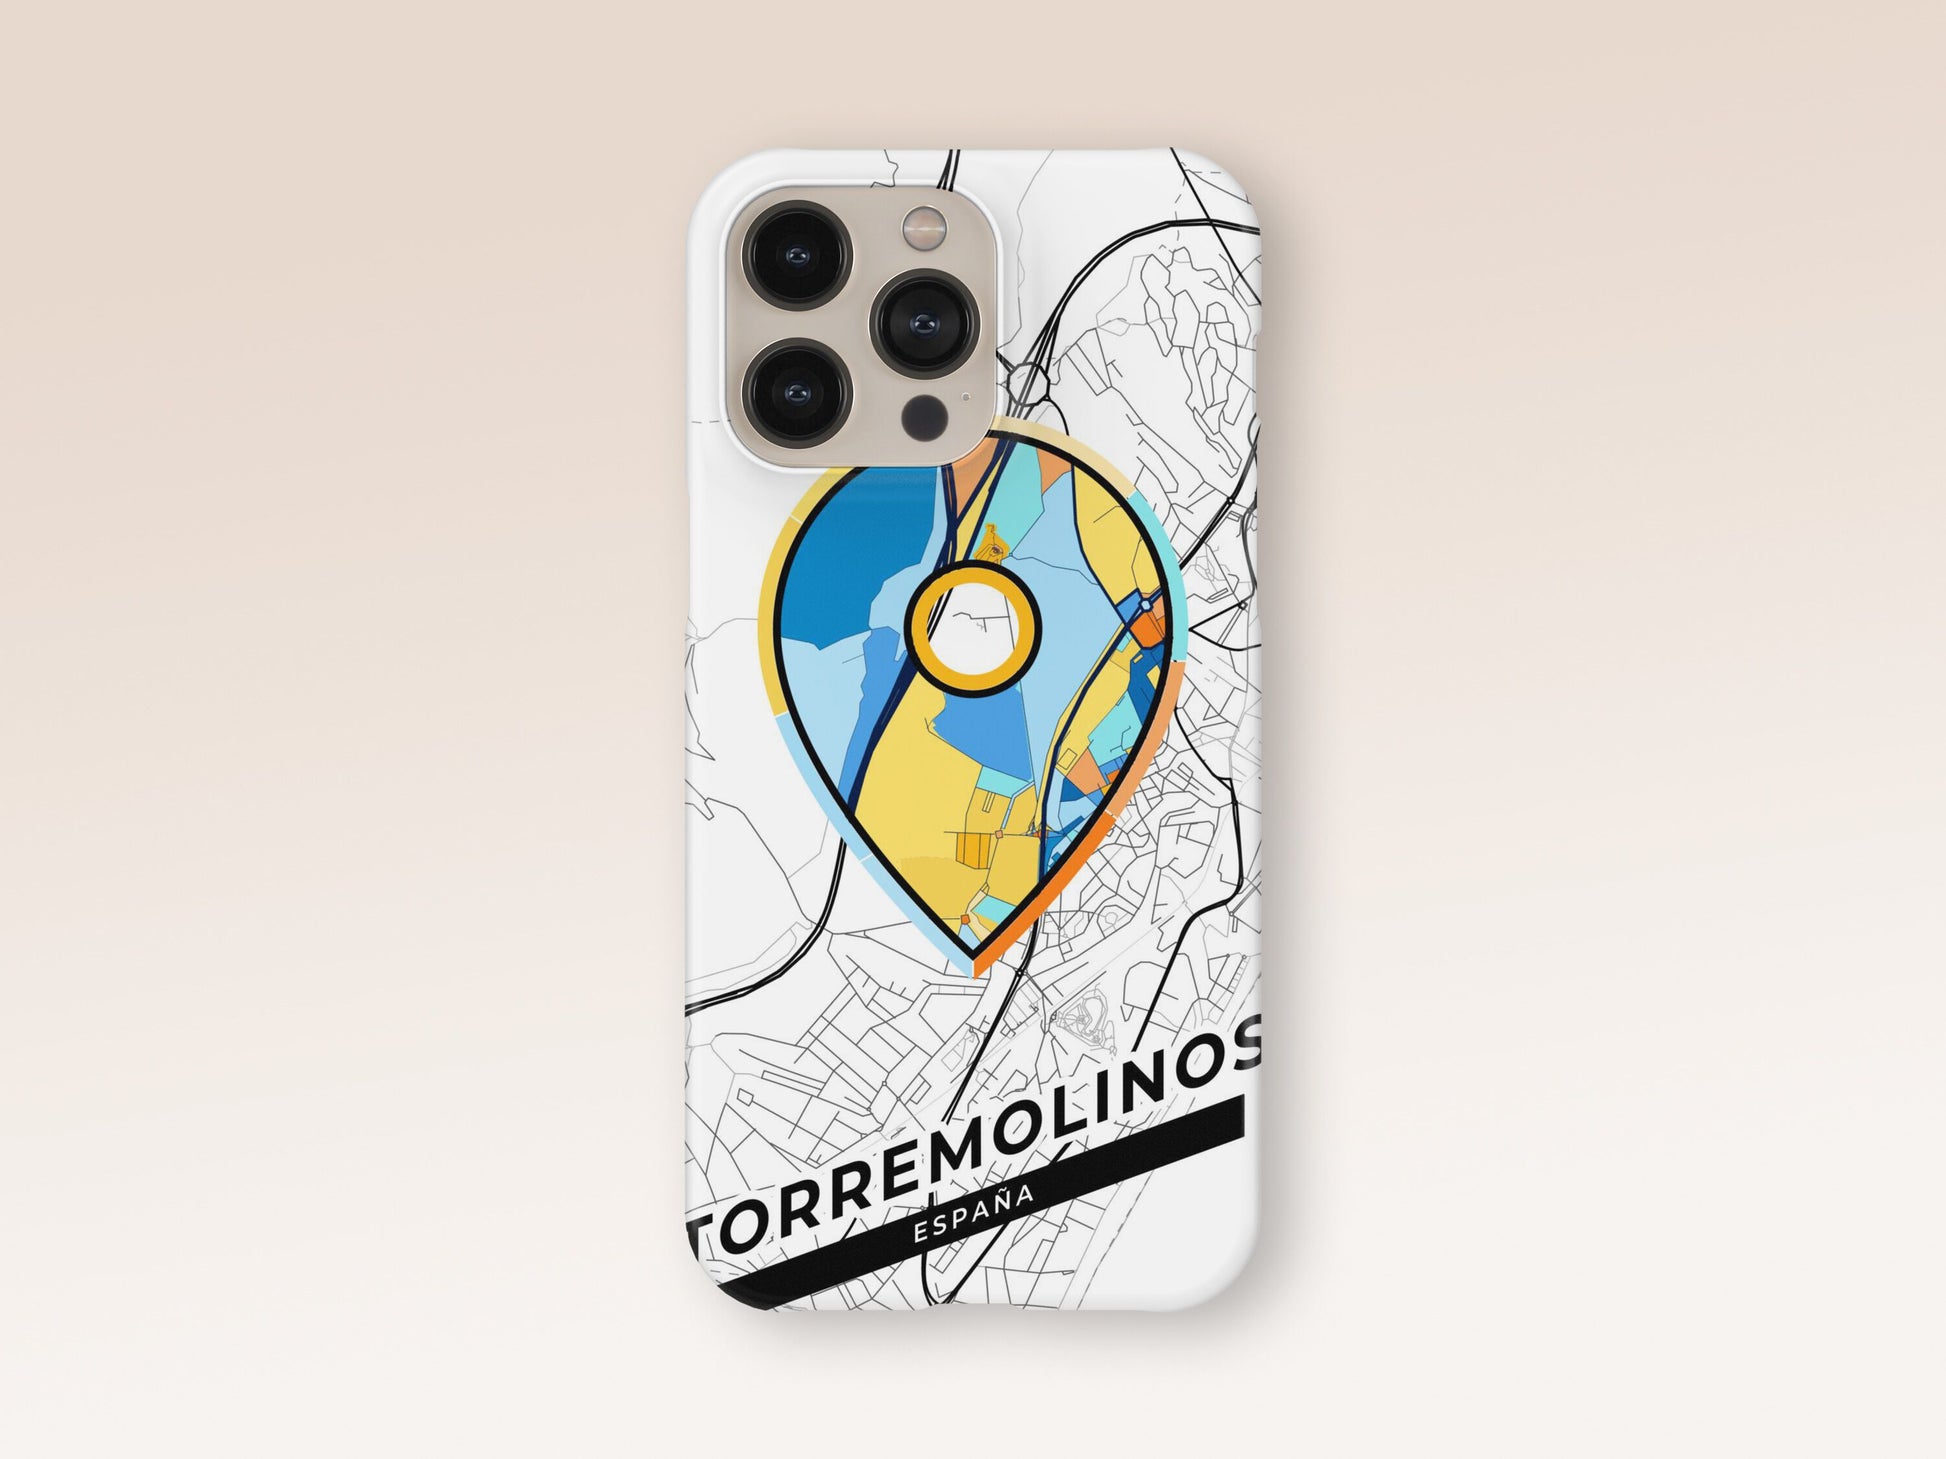 Torremolinos Spain slim phone case with colorful icon. Birthday, wedding or housewarming gift. Couple match cases. 1